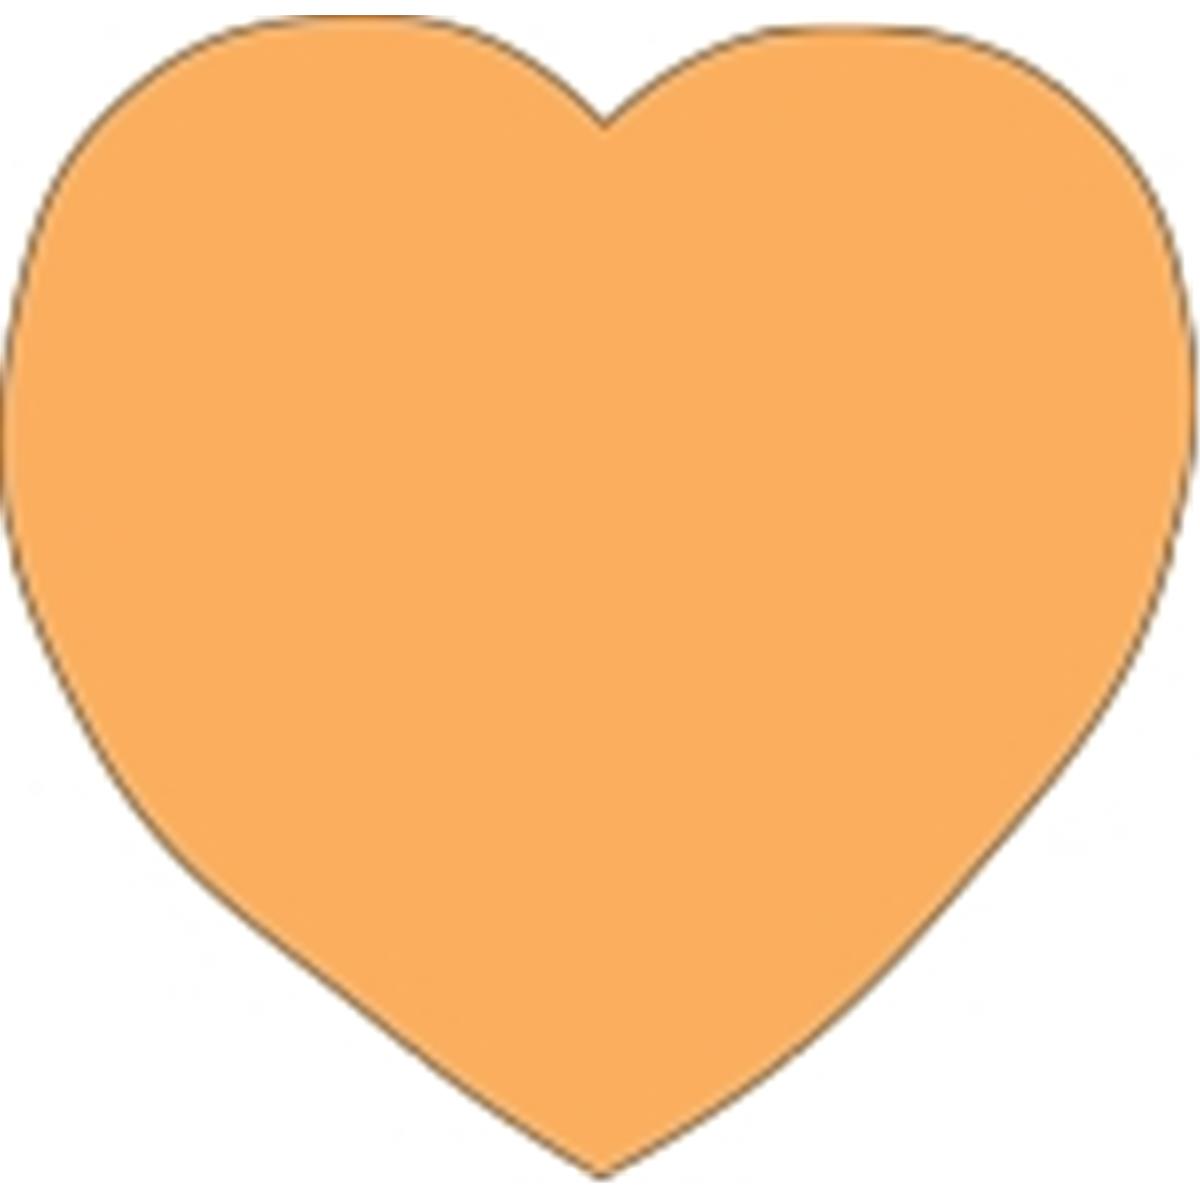 Se-0981 4.5 X 4 In. Small Single Color Sticky Shape Notepad, Orange Heart - 50 Sheets Per Pack